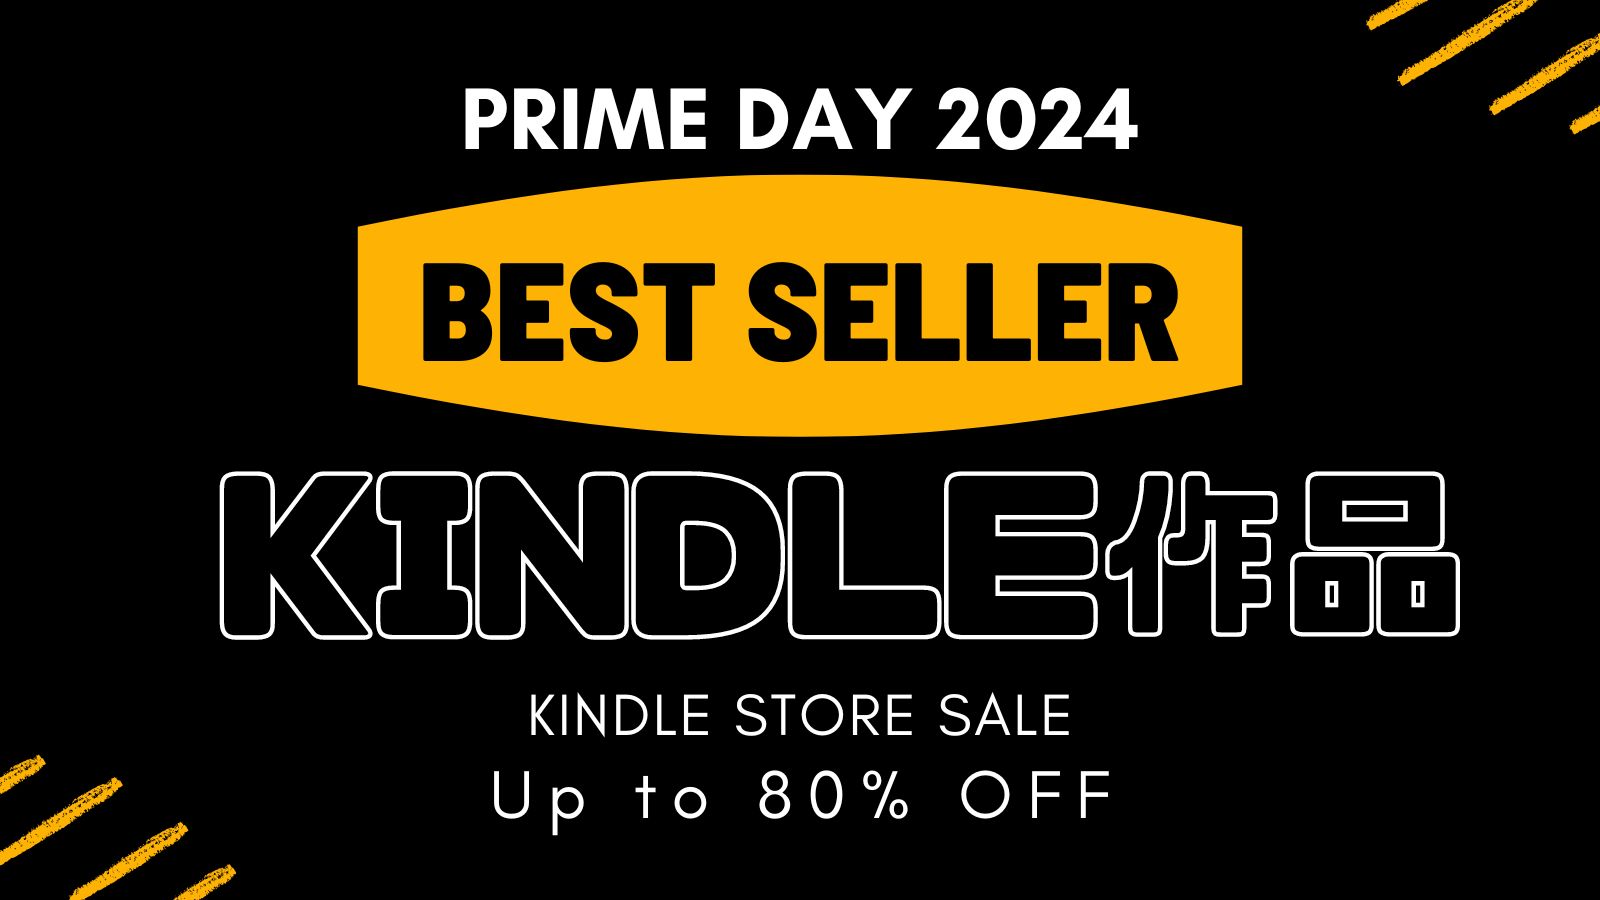 Kindle Store Sale for best sellers